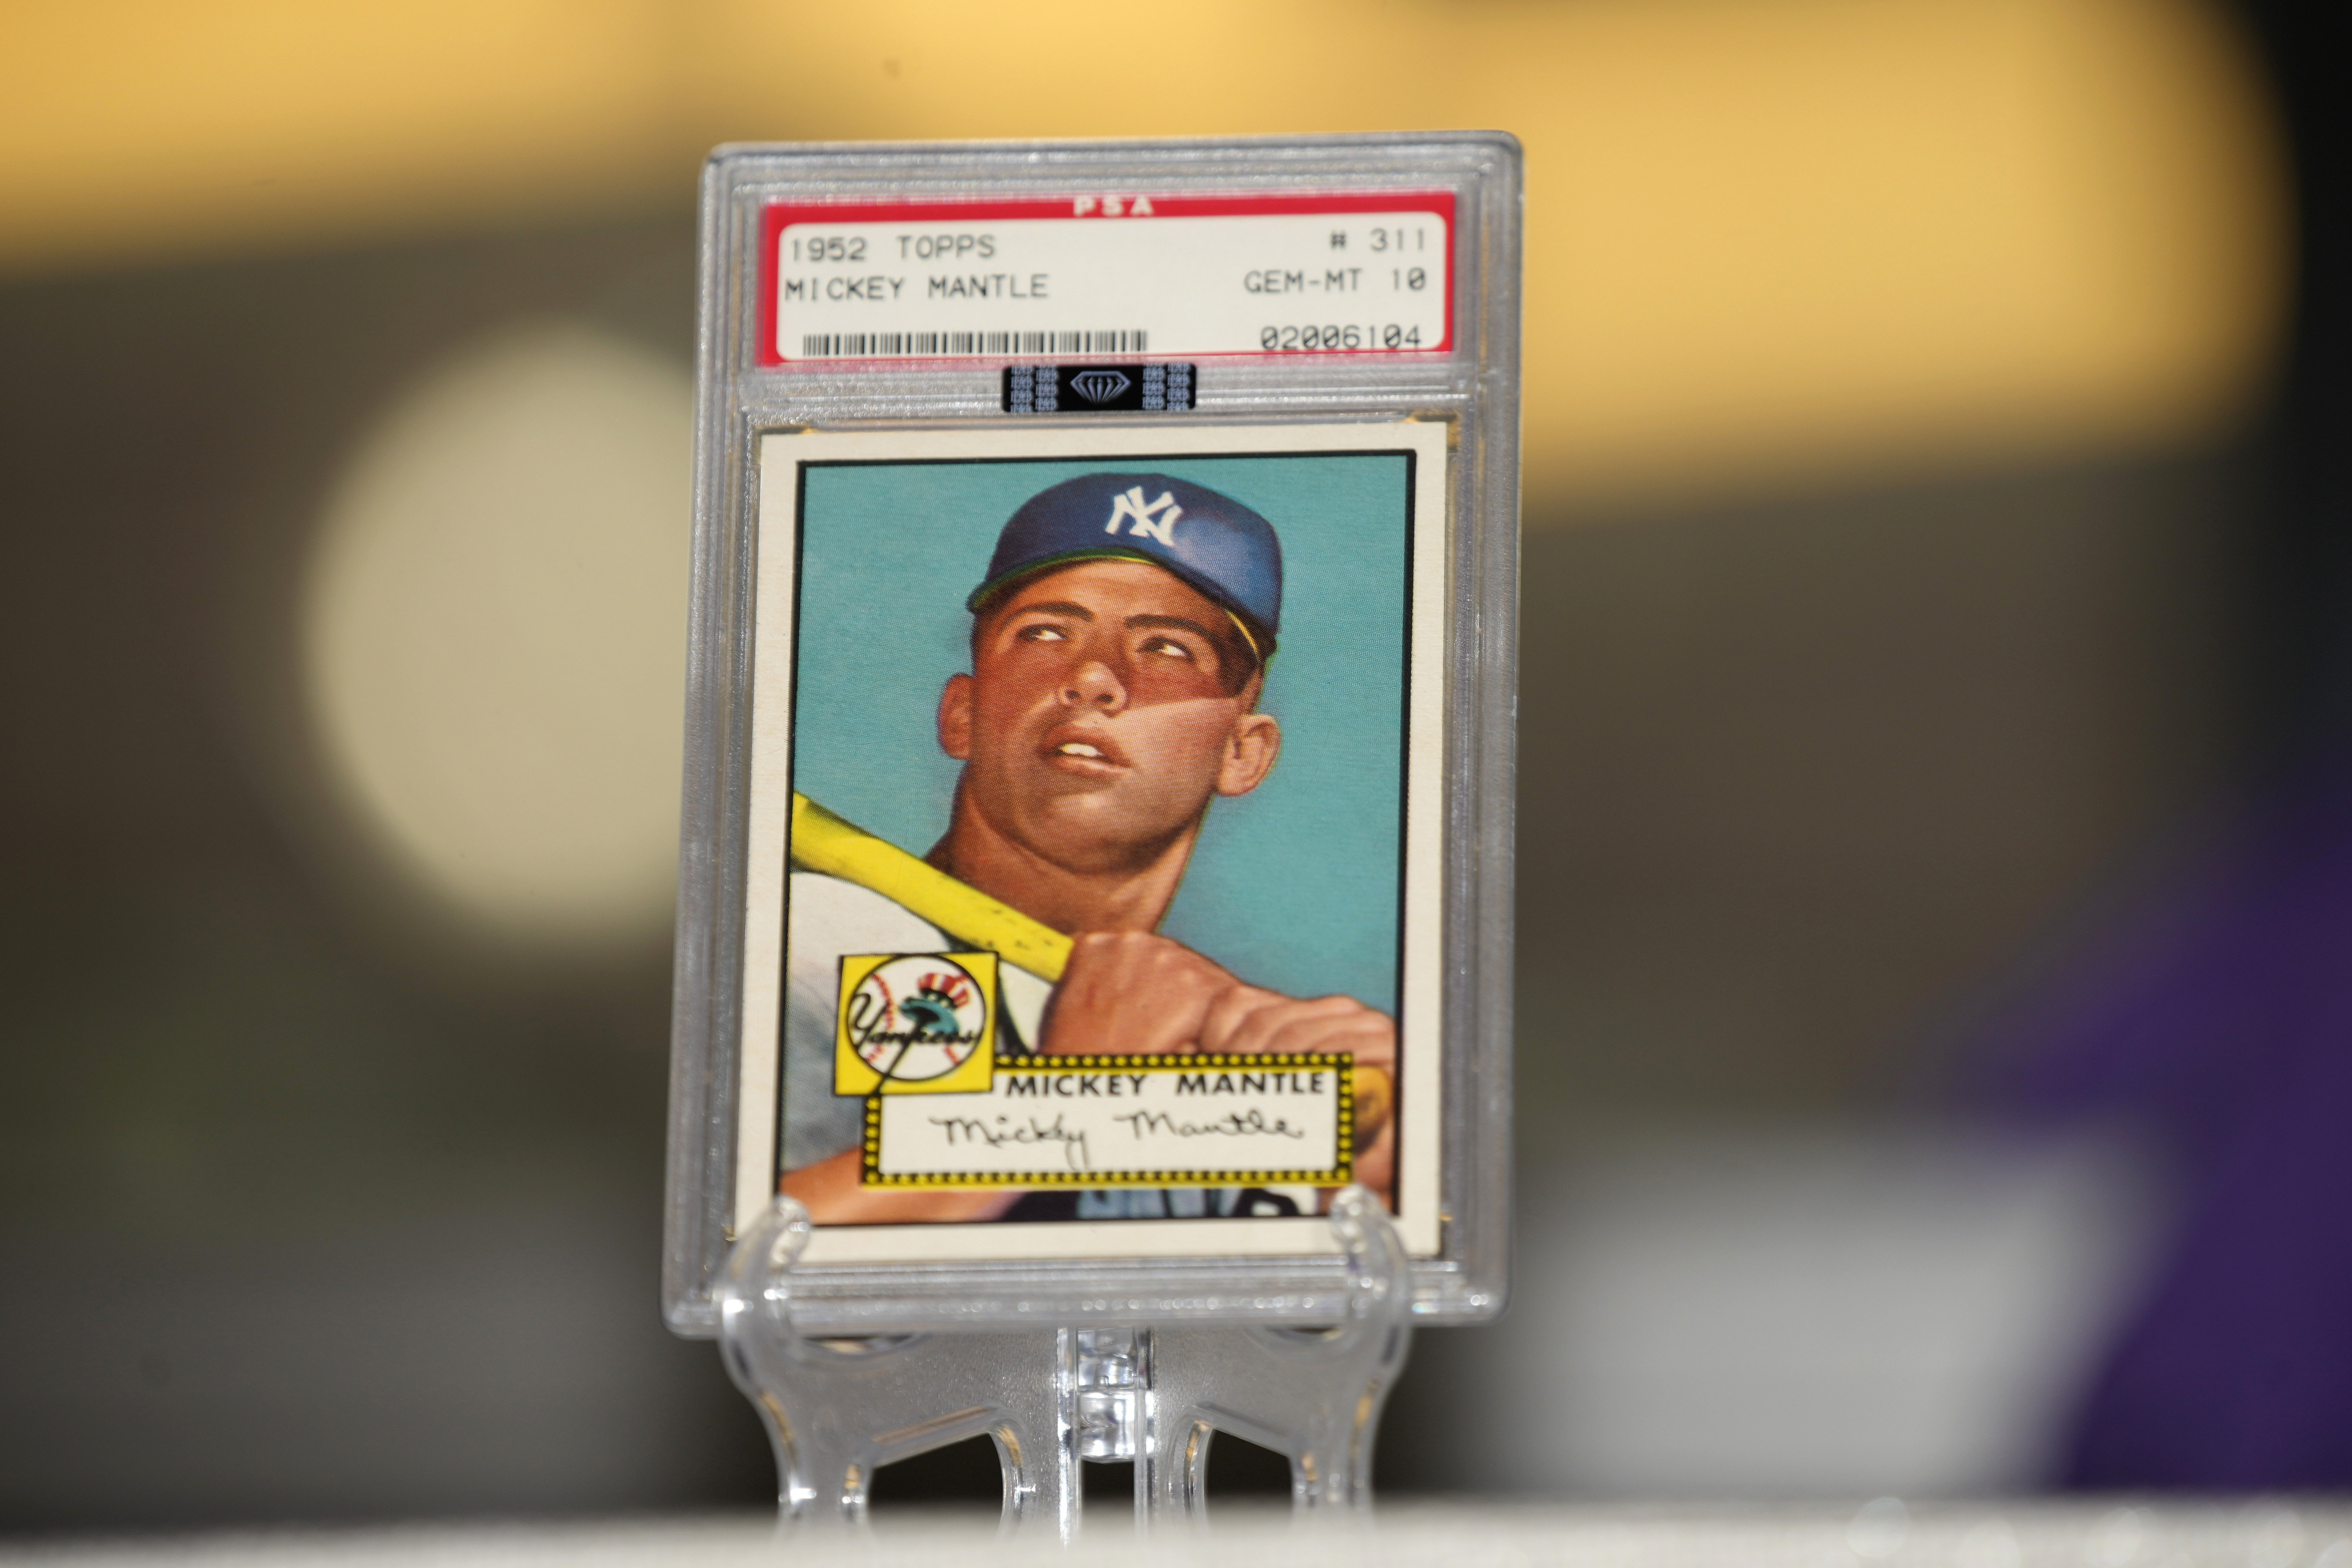 Yankees Legend Mickey Mantle 1952 Topps Card Sells for $2M at